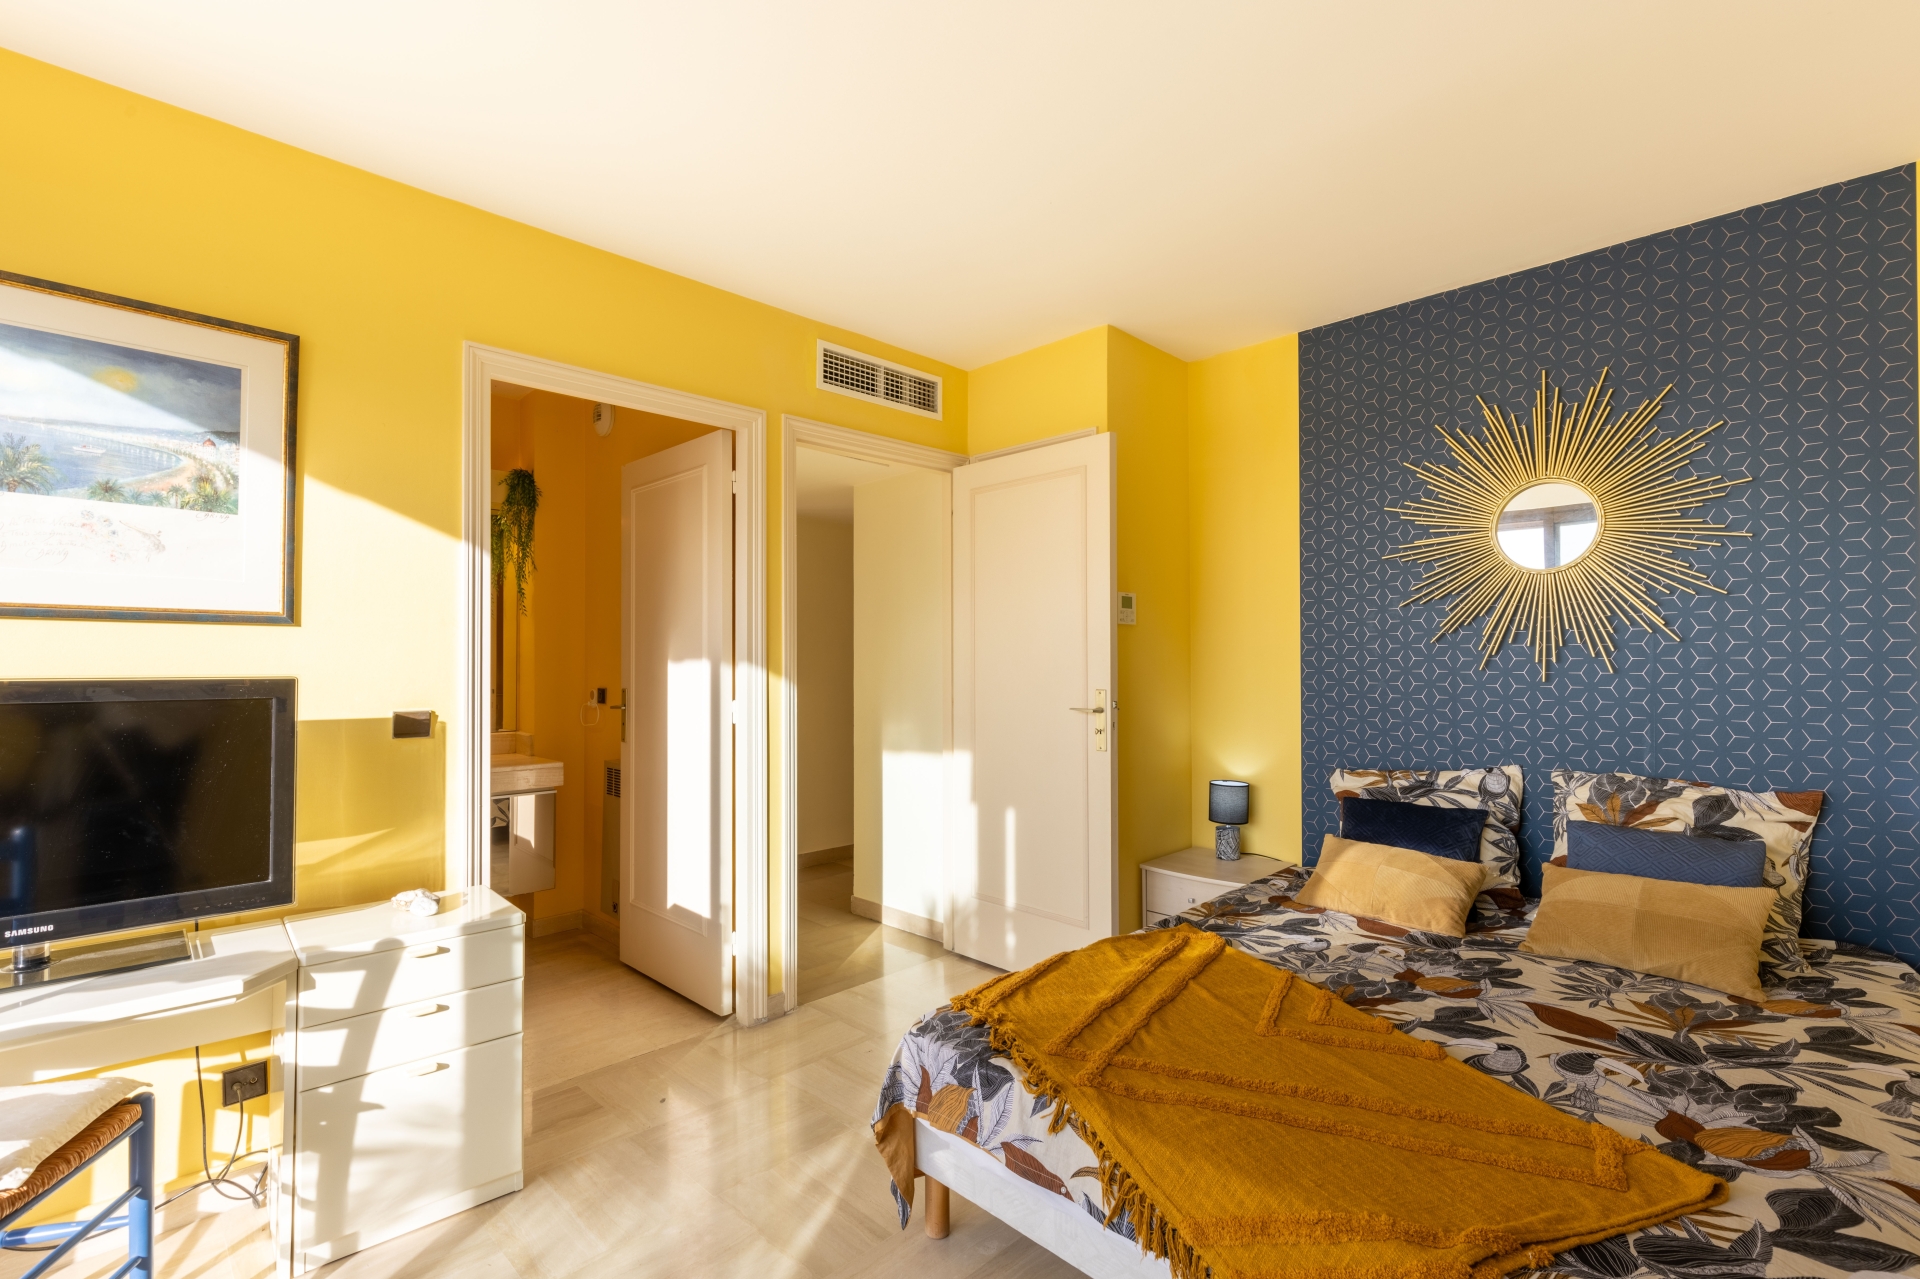 Dotta 5 rooms apartment for sale - VILLA ANGELICO - Mont Boron - Nice - imghdr